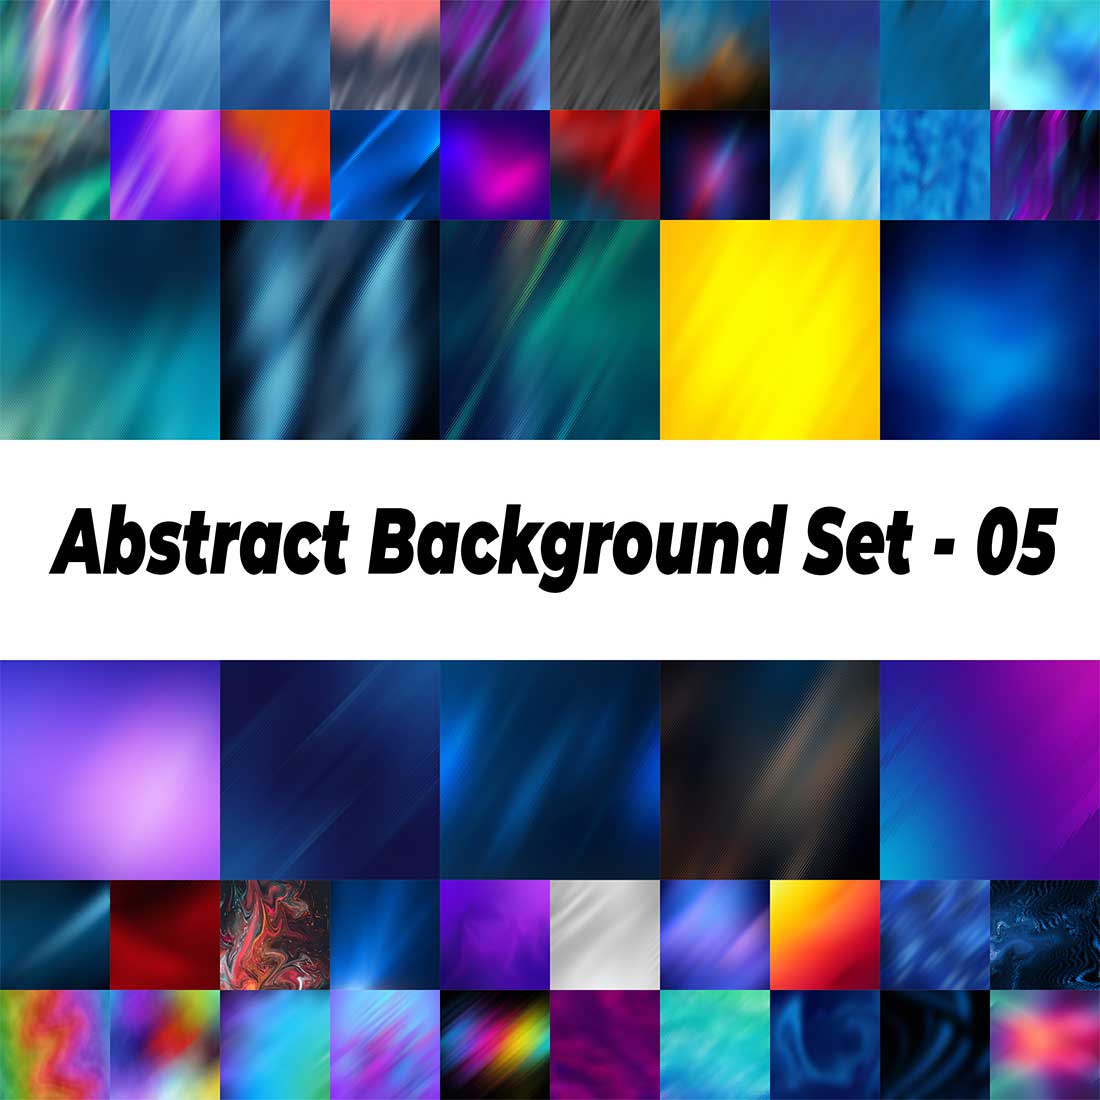 Abstract Gradient Background Luxury Vivid Blurred Colorful Texture Wallpaper Photo - free - main cover.